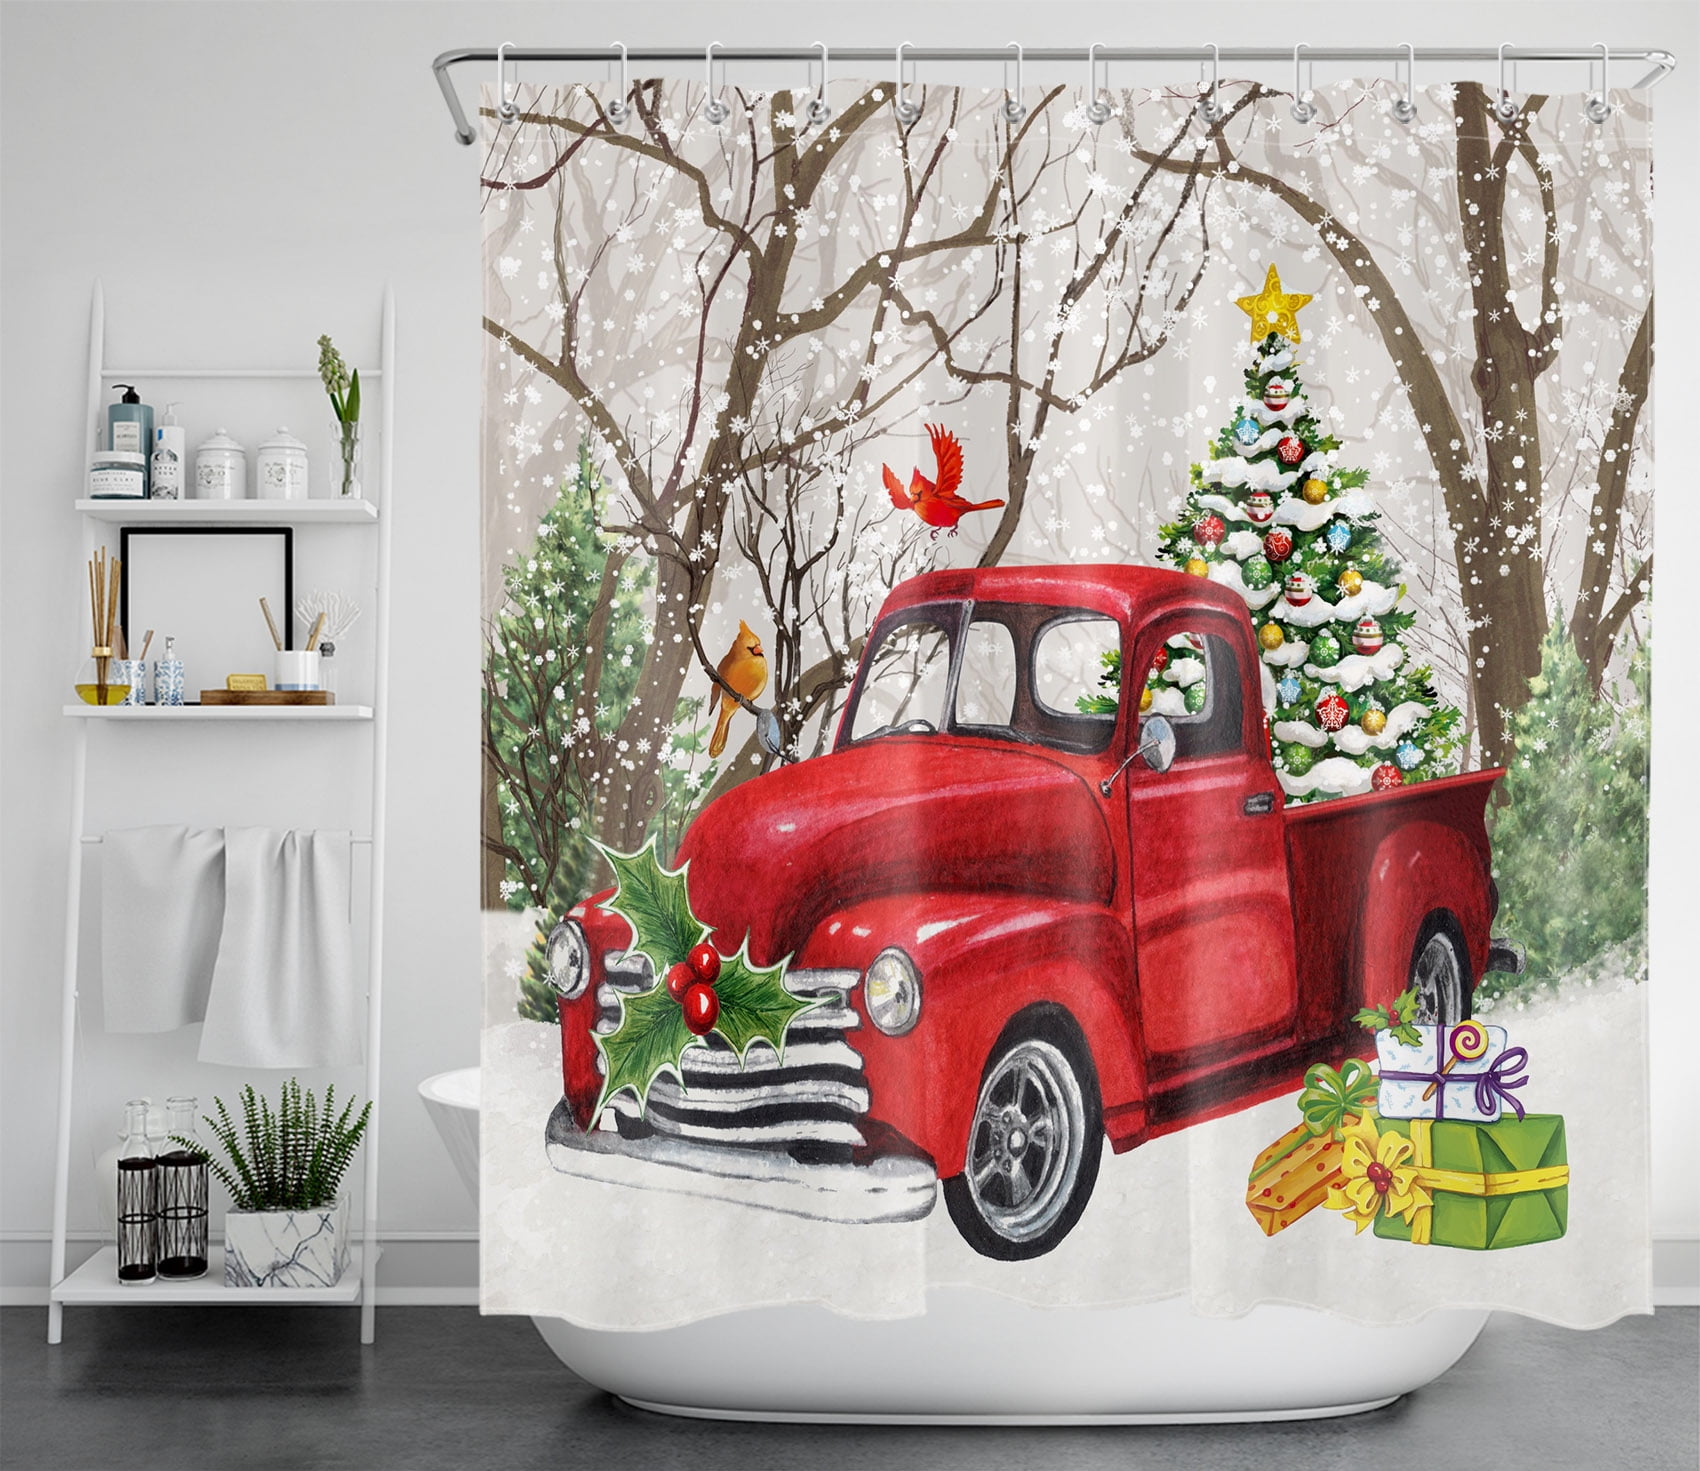 Details about   Red Car Christmas Gifts Dog Xmas Tree Shower Curtain Bathroom Accessory Sets 